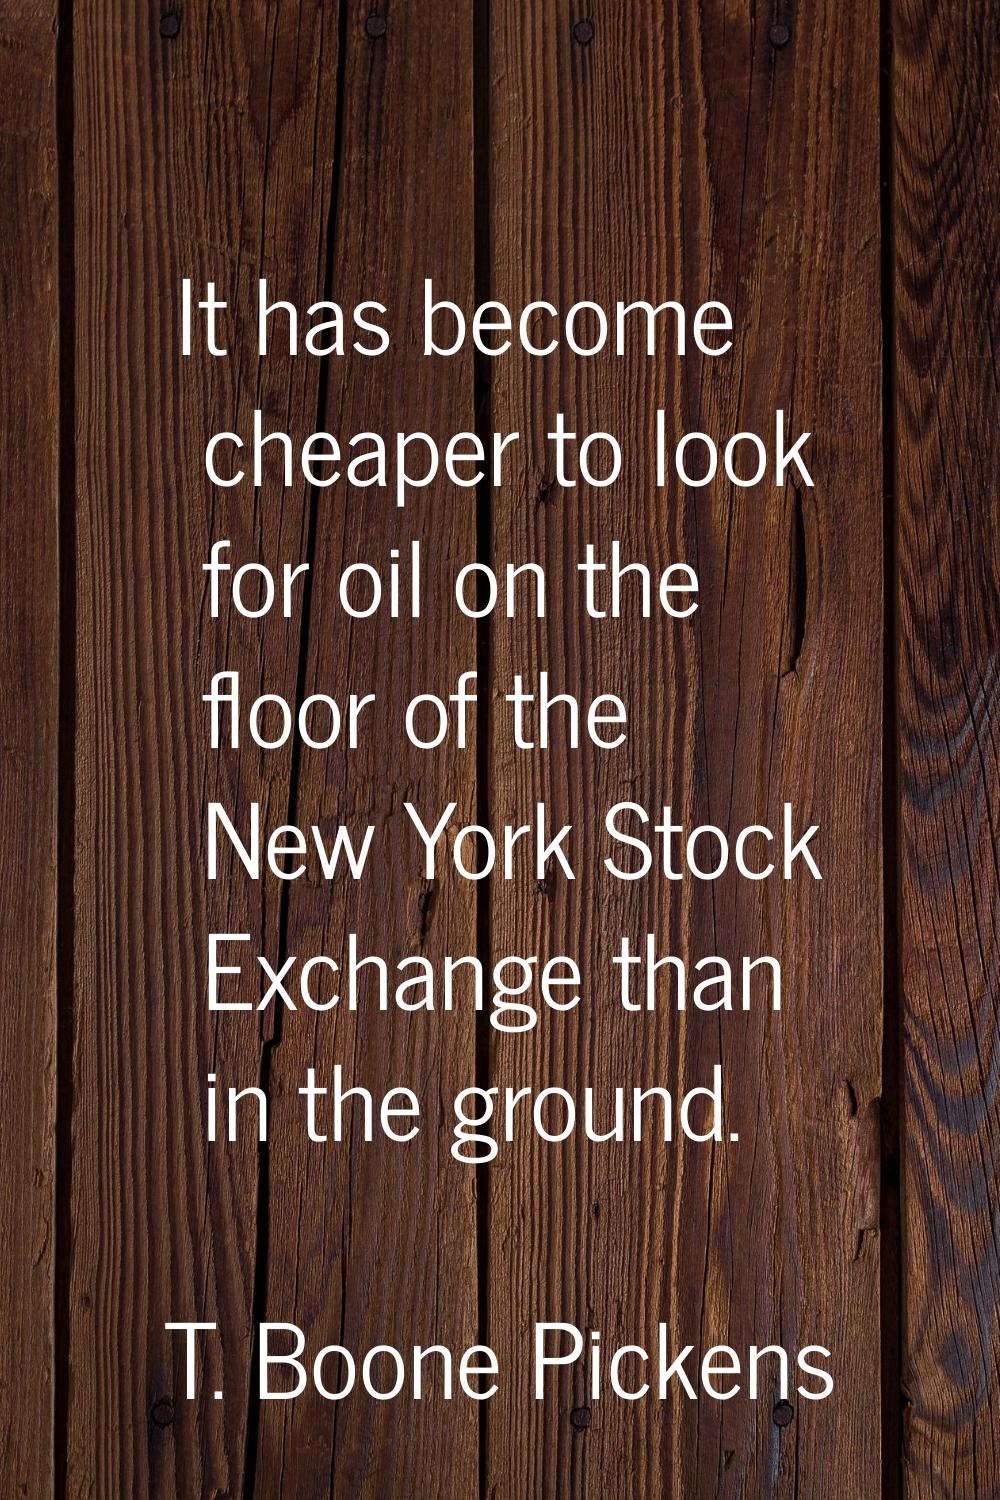 It has become cheaper to look for oil on the floor of the New York Stock Exchange than in the groun